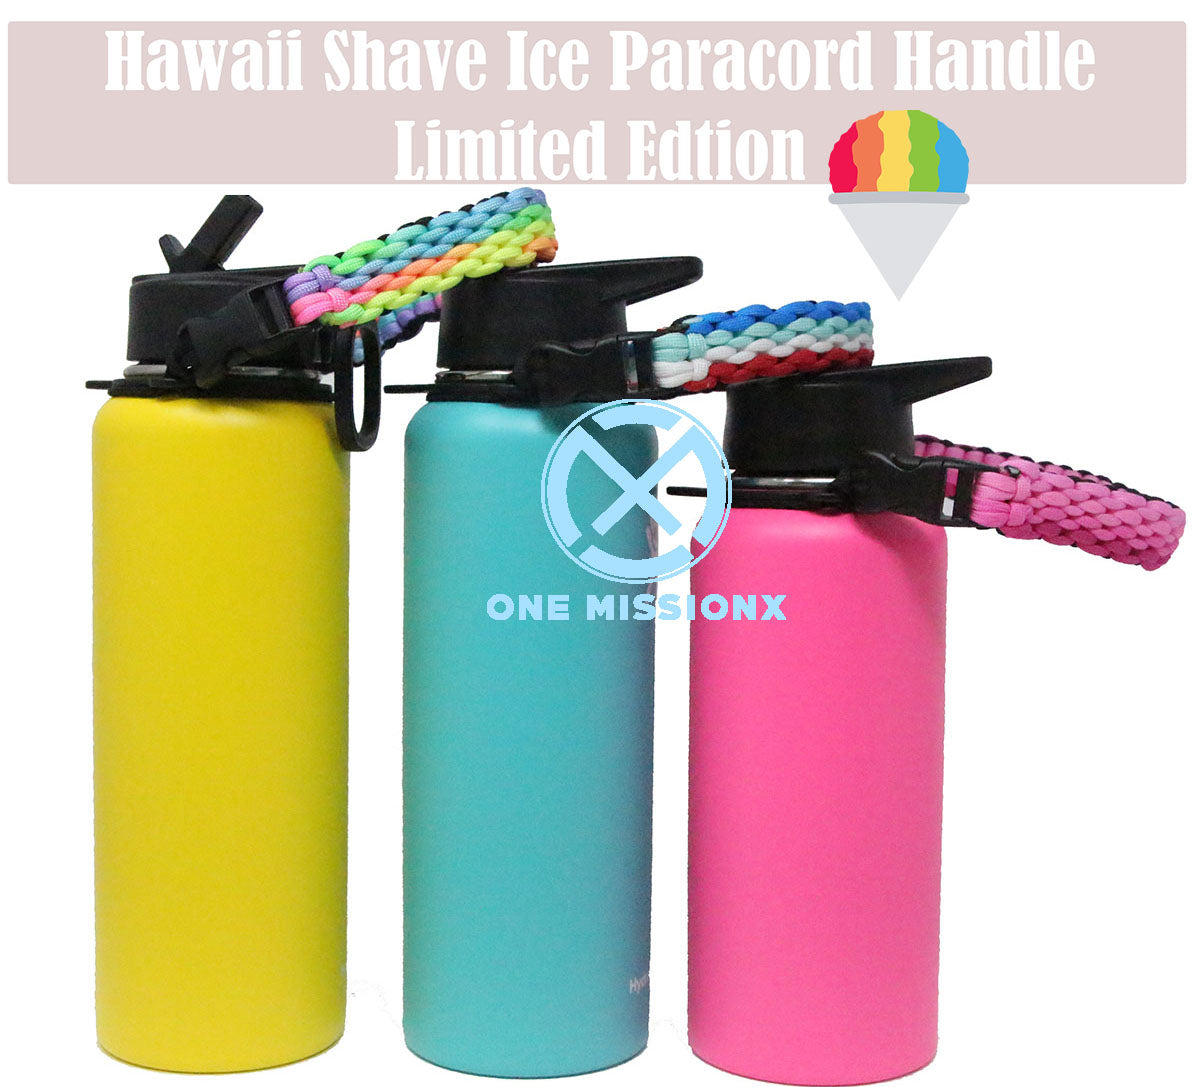 Paracord Handle Reusable Water Bottle Accessories, Compatible with  Hydroflask, Iron Flask, Thermoflask, Takeya, 12 oz to 64 oz Water Bottles,  Survival